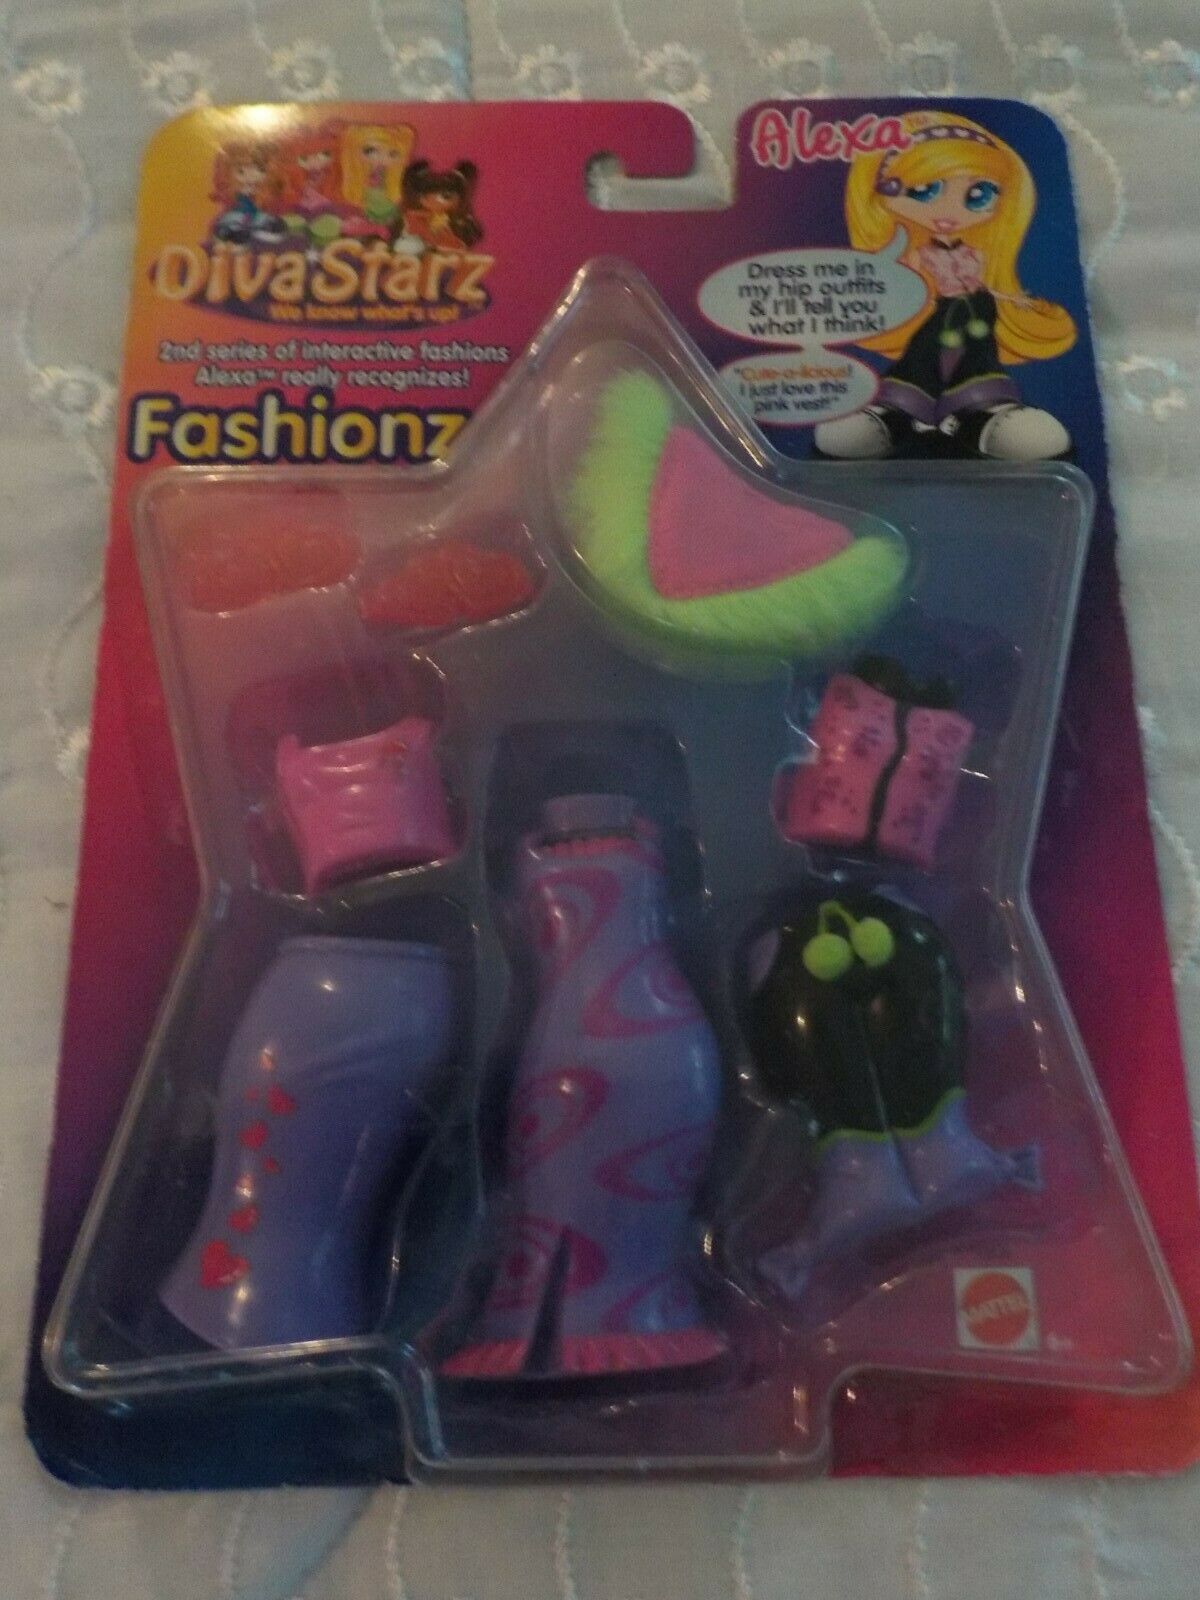 Diva Starz Alexa Interactive Fashions New 2nd Series Clothes For "tia" By Mattel